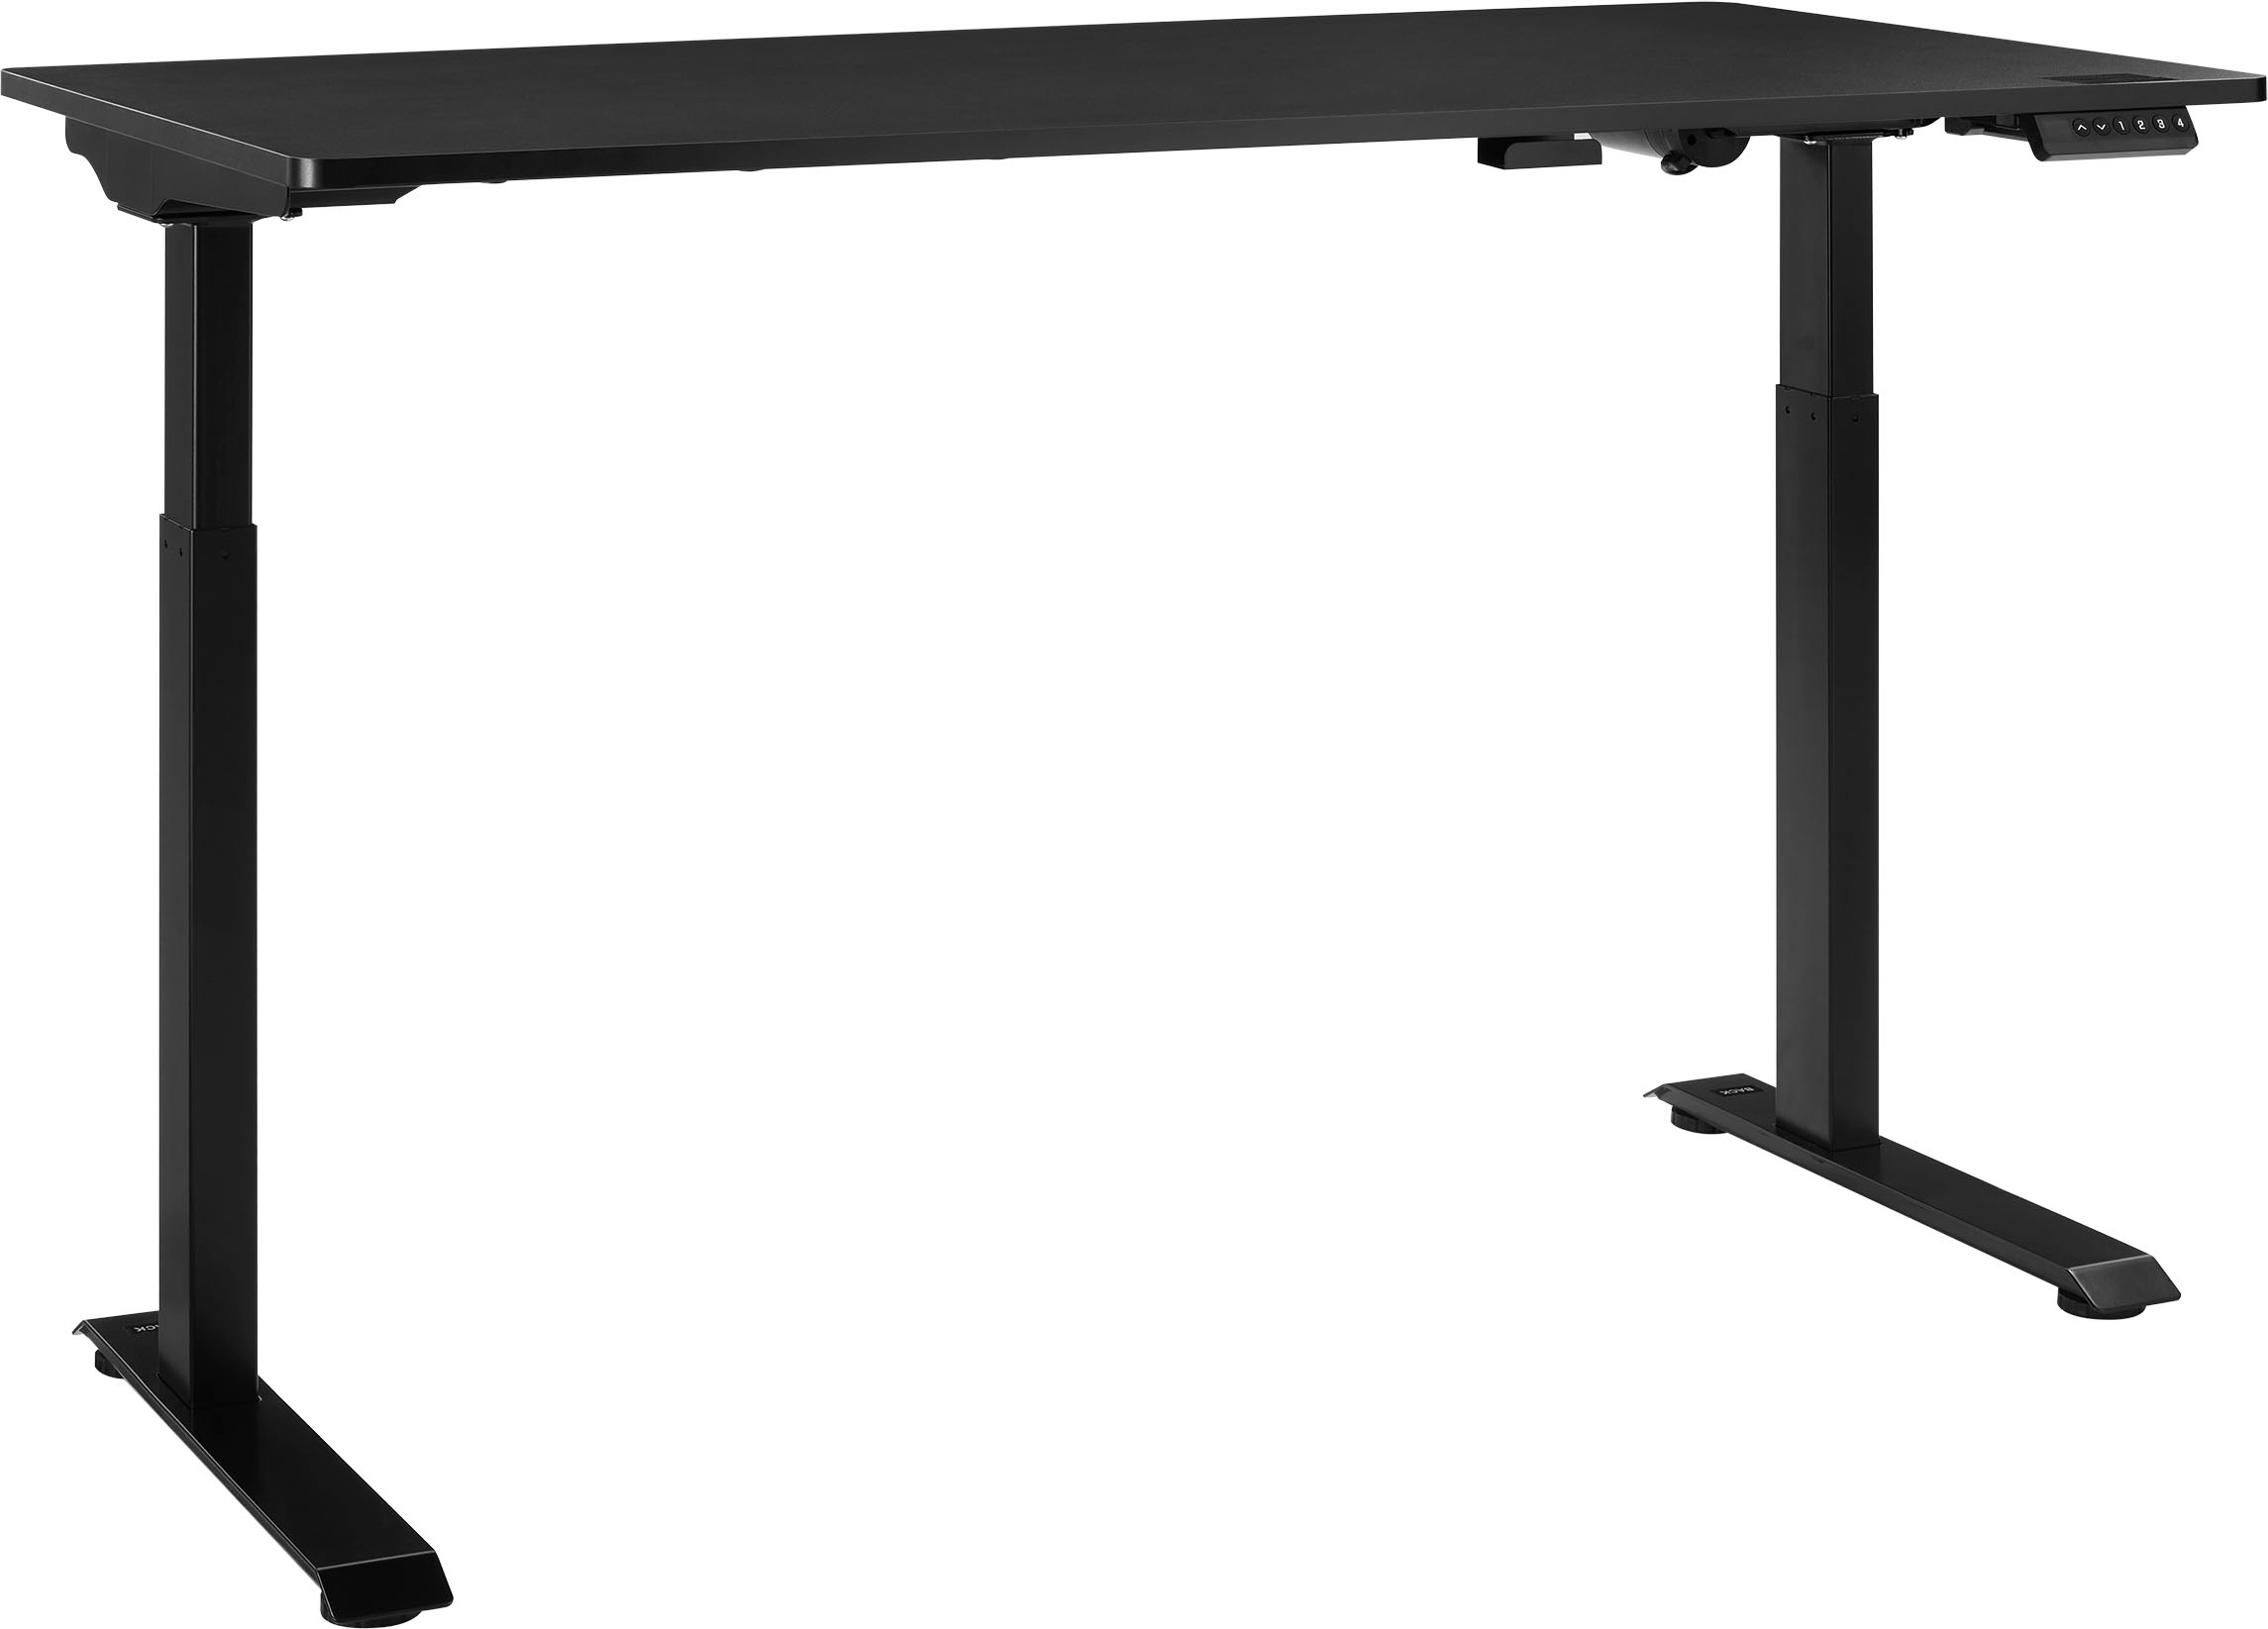 Questions and Answers: Insignia™ Adjustable Standing Desk with ...